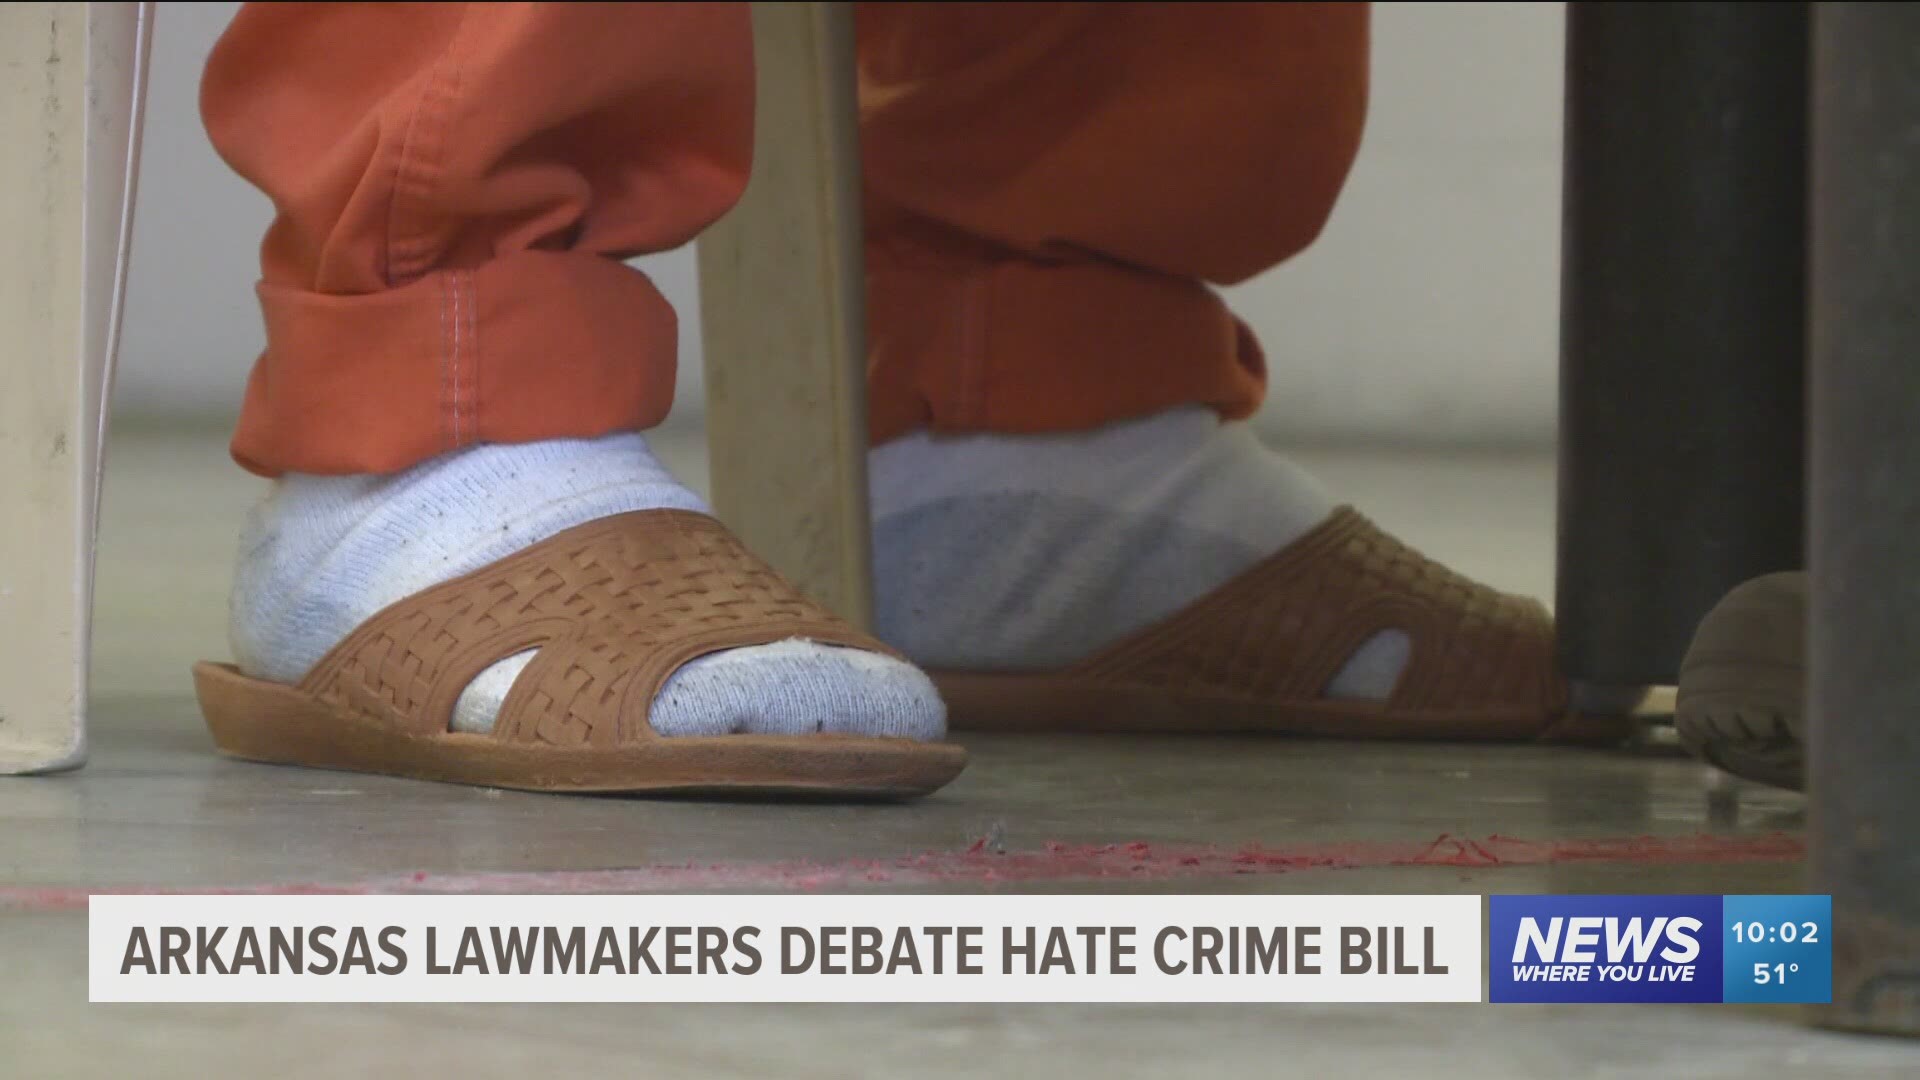 In Arkansas, the debate over a hate crimes bill turned into a spat between lawmakers Wednesday, who then went on to pass a scaled-back measure.